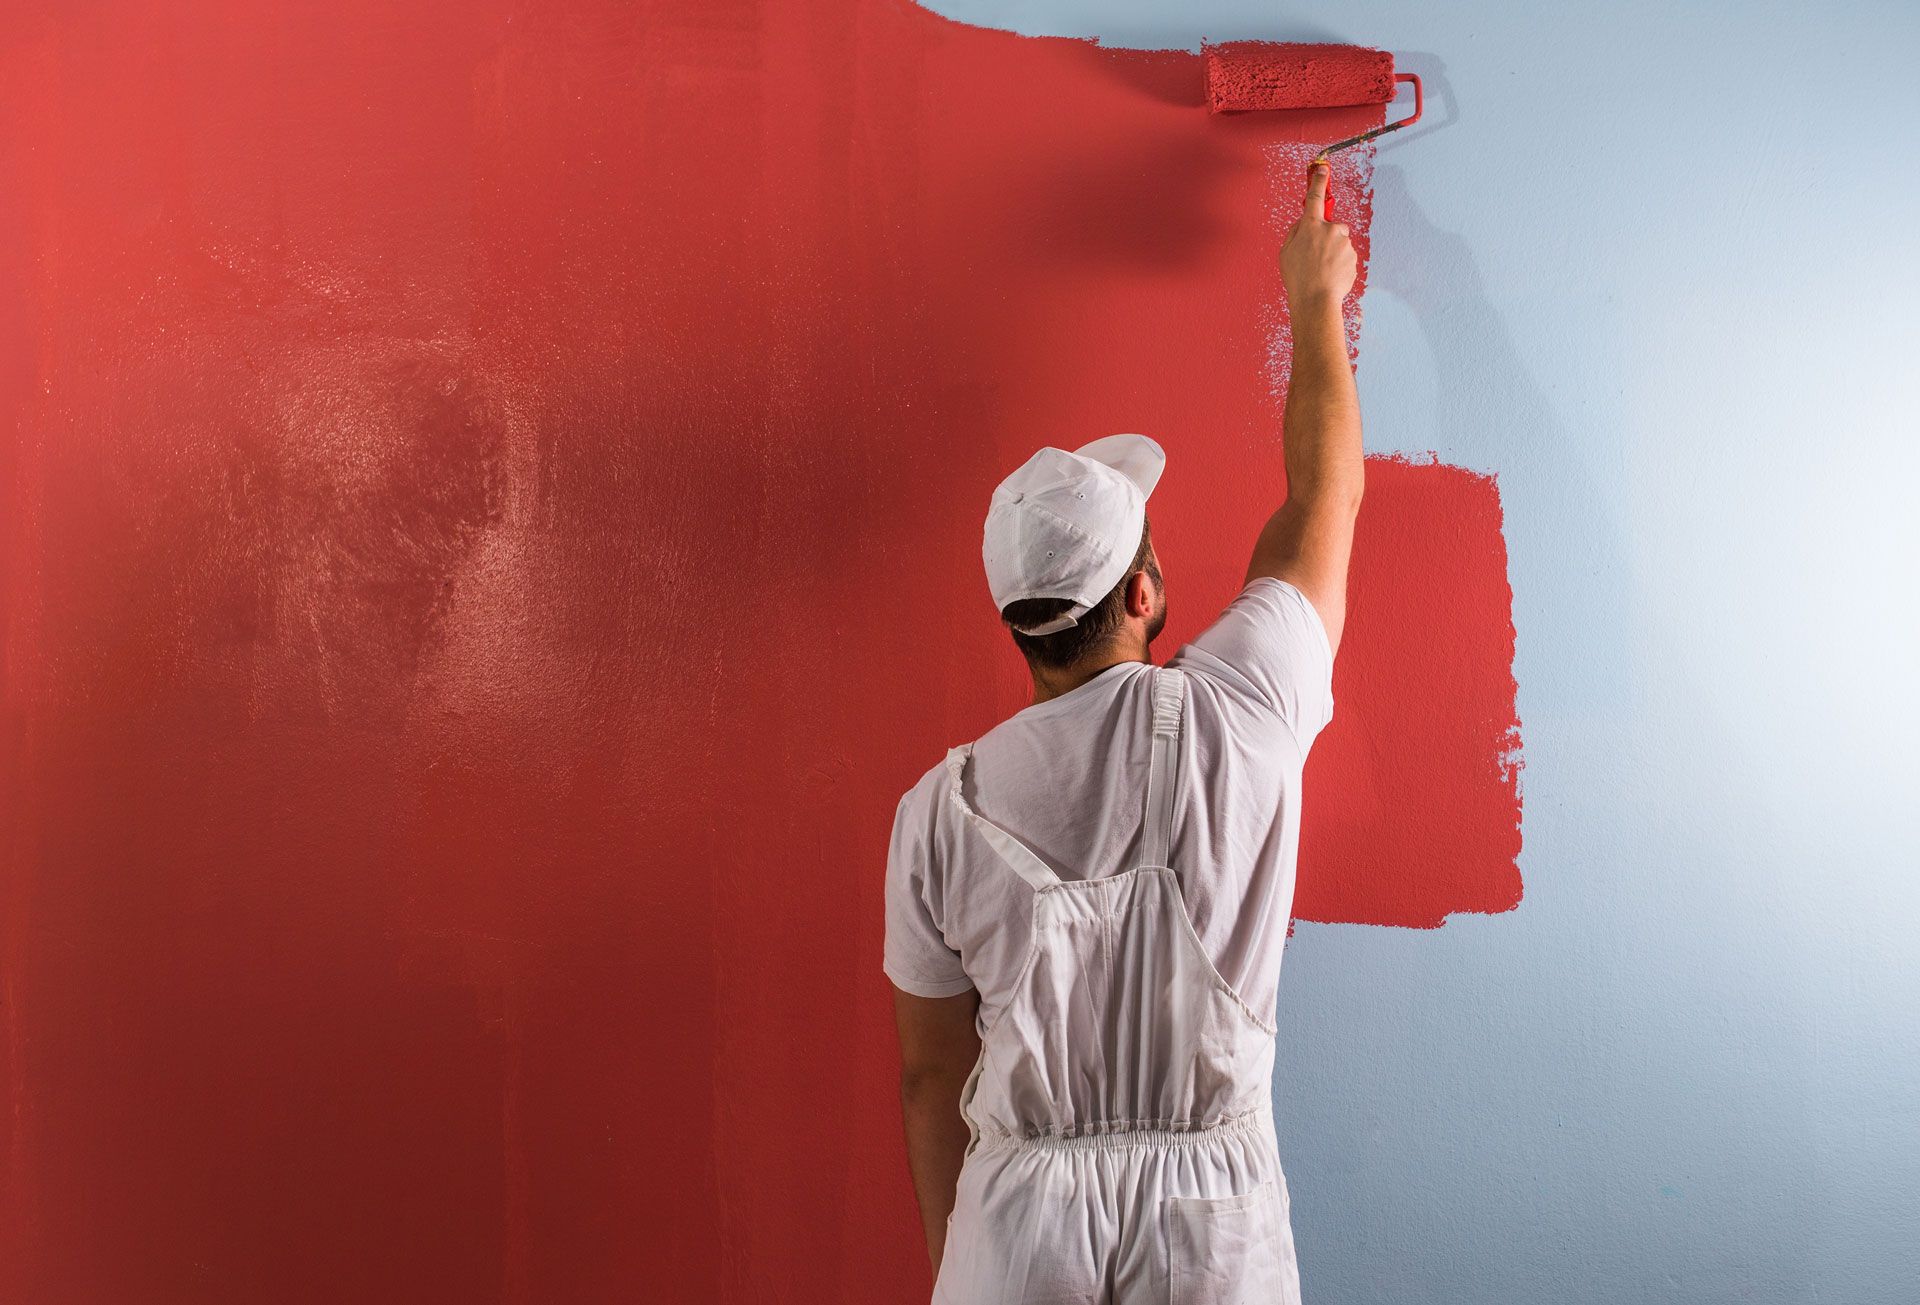 A man is painting a wall red with a roller.